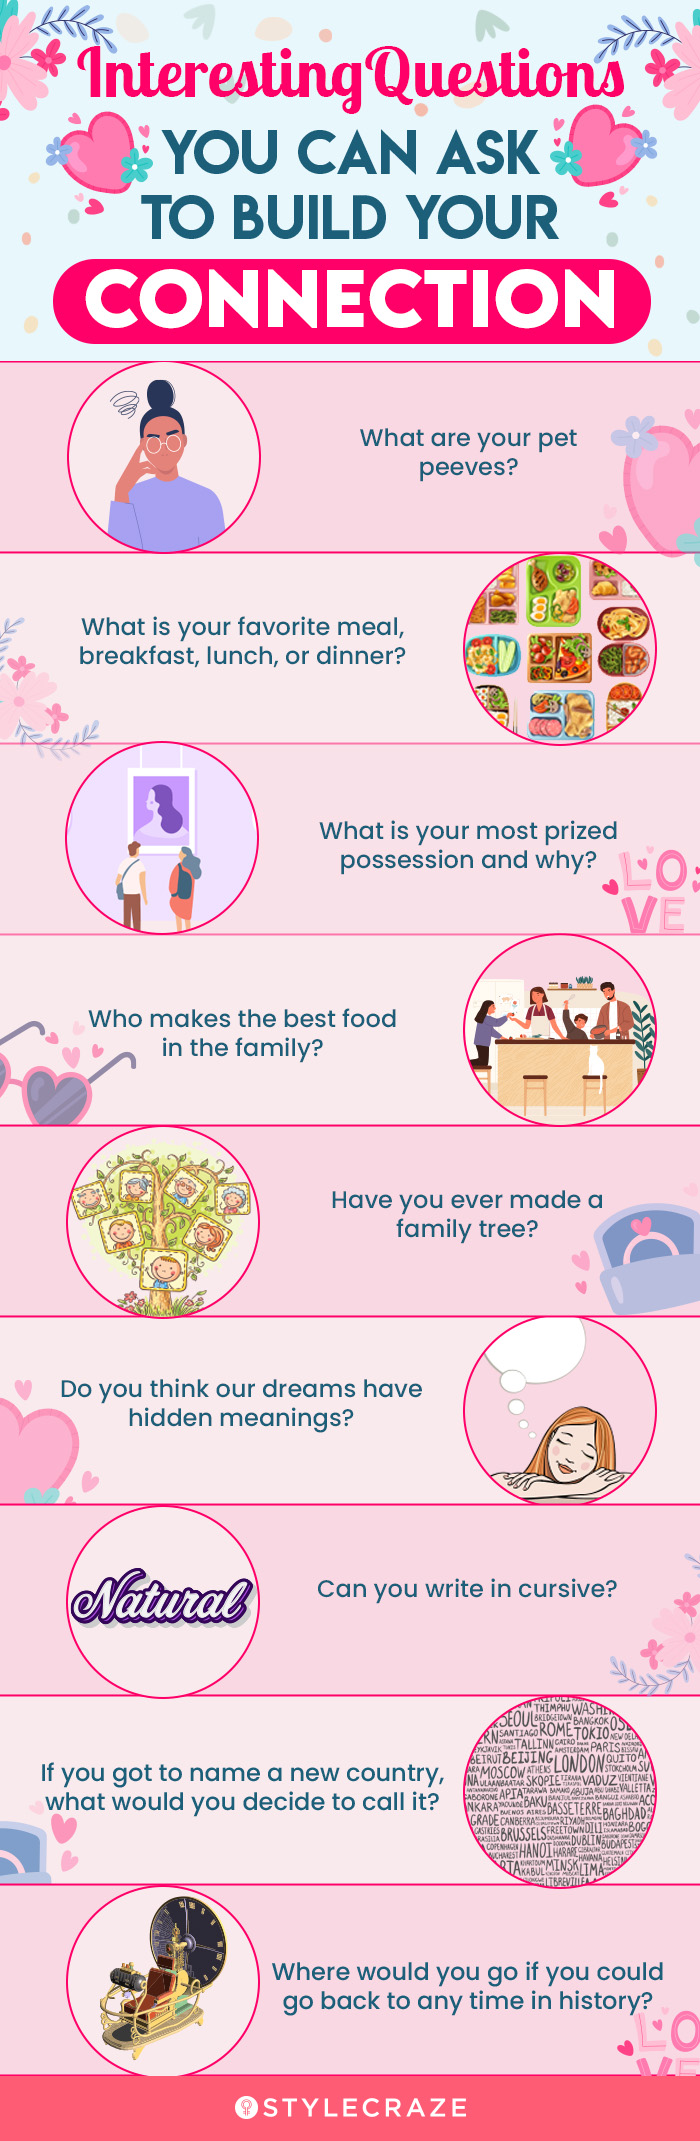 interesting questions you can ask to build your connection (infographic)